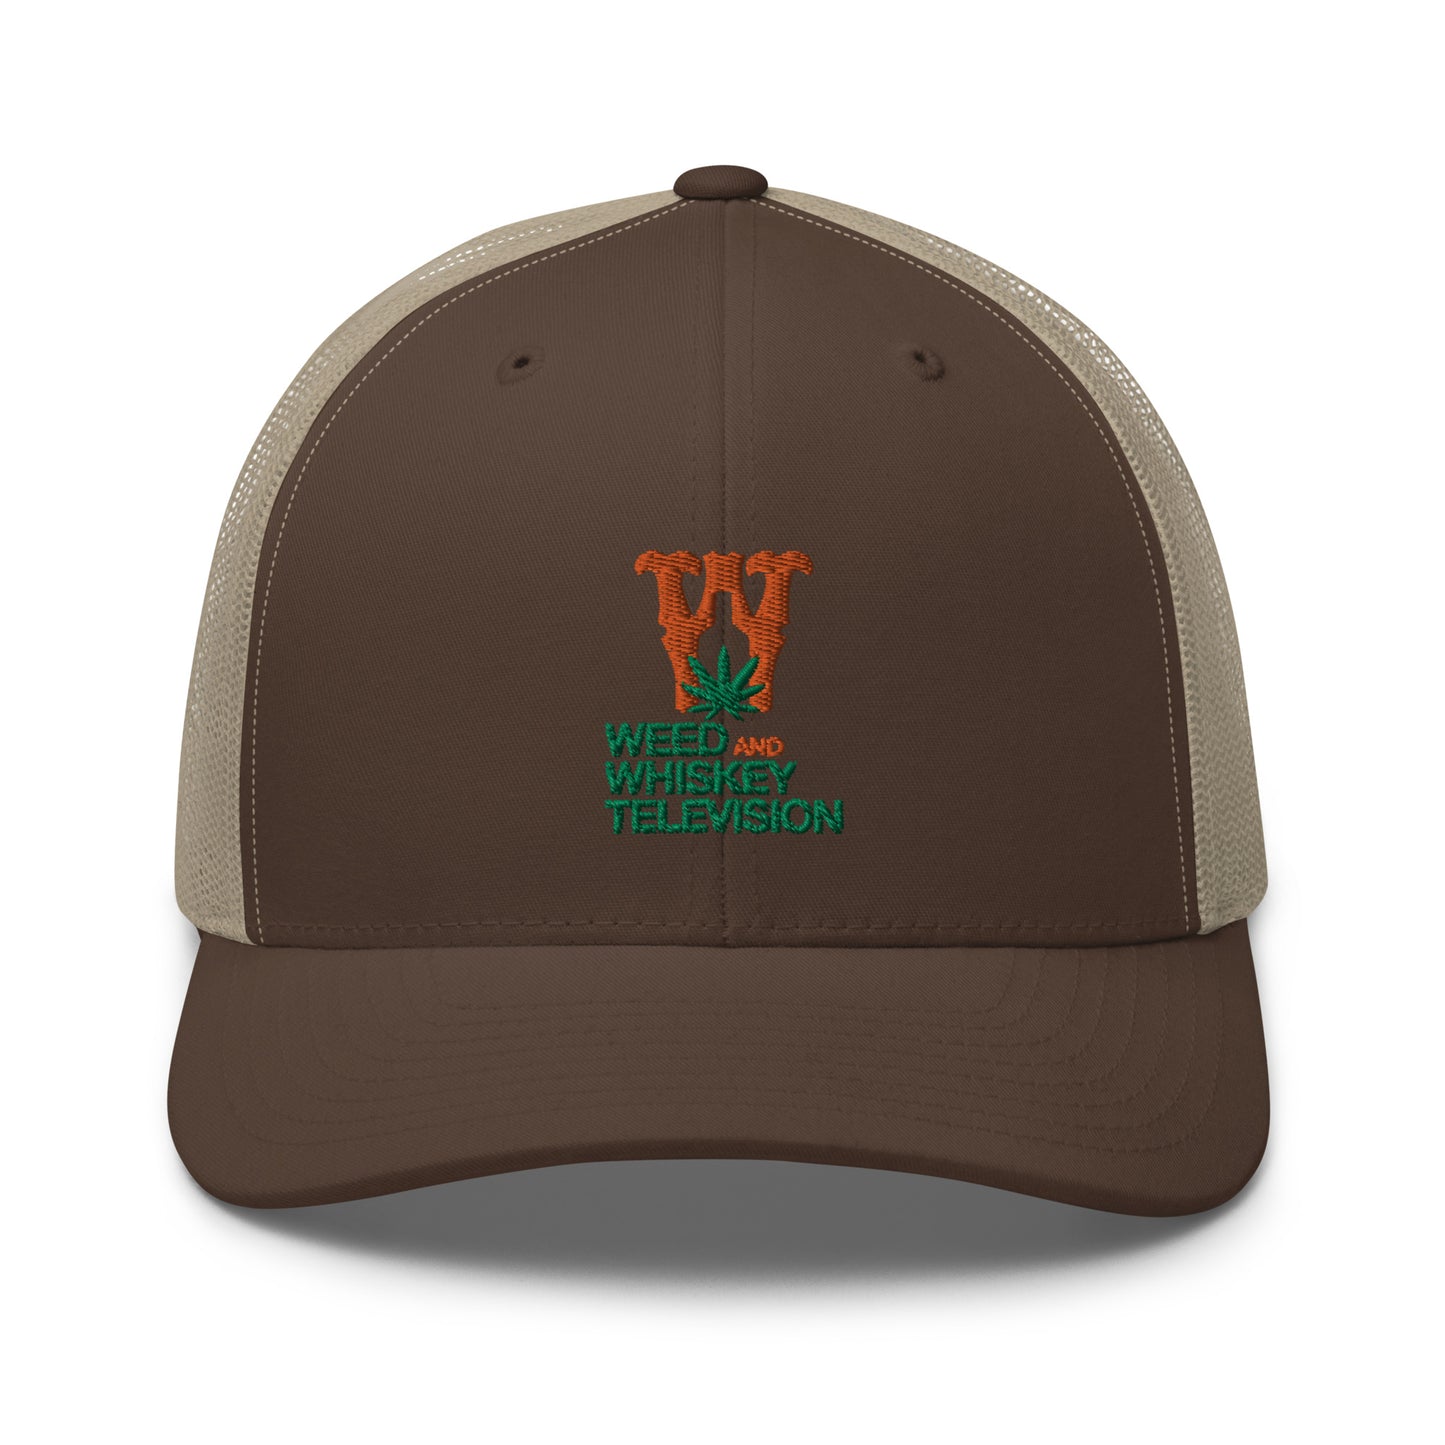 Weed And Whiskey Television Trucker